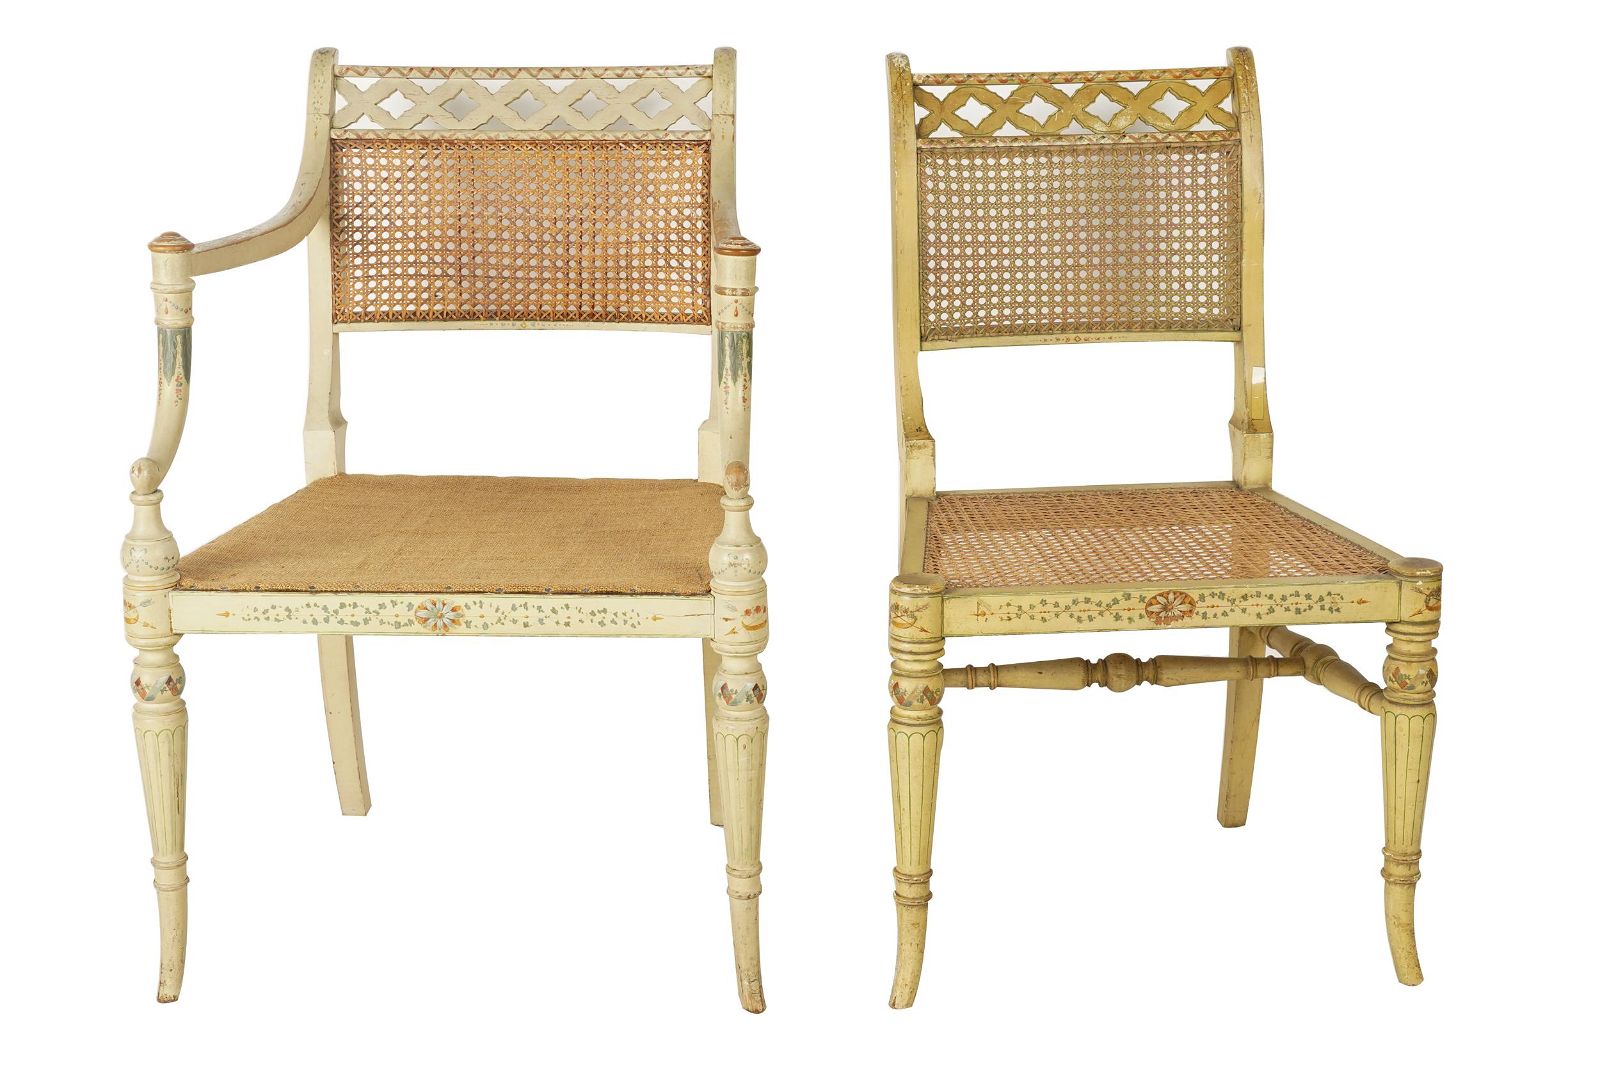 TWO REGENCY PAINTED WOOD CHAIRS19th 3974b8